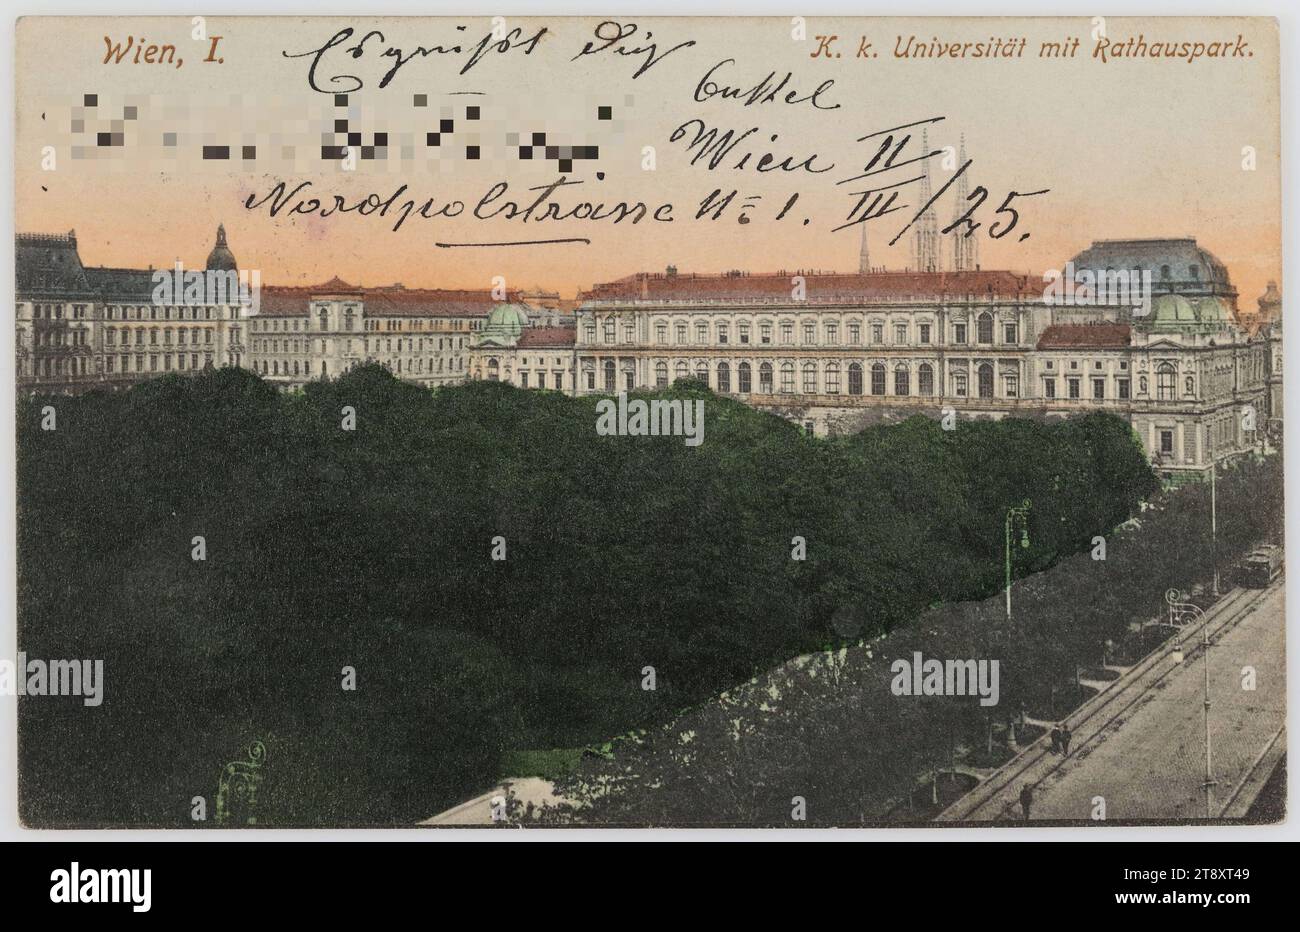 Vienna, I. K. k. Universität mit Rathauspark, Wolf, Vereinigte Kunstanstalten, Wien, Producer, 1908, paperboard, hand colorised, Collotype, Inscription, FROM, Wien, TO, Franzensfeste, ADDRESS, Herr, Im K. u. K. Infanterie Regmt., N=18 - 16 Comp., Franzensfeste, Tirol, MESSAGE, Dear Karl! I have received your card, I will send you a little something, but not until the Easter holidays, I would like to draw your attention to the fact that you should be good at the millthär, that is, be punctual and obedient, so that you can achieve something, if you become a sub-officer Stock Photo